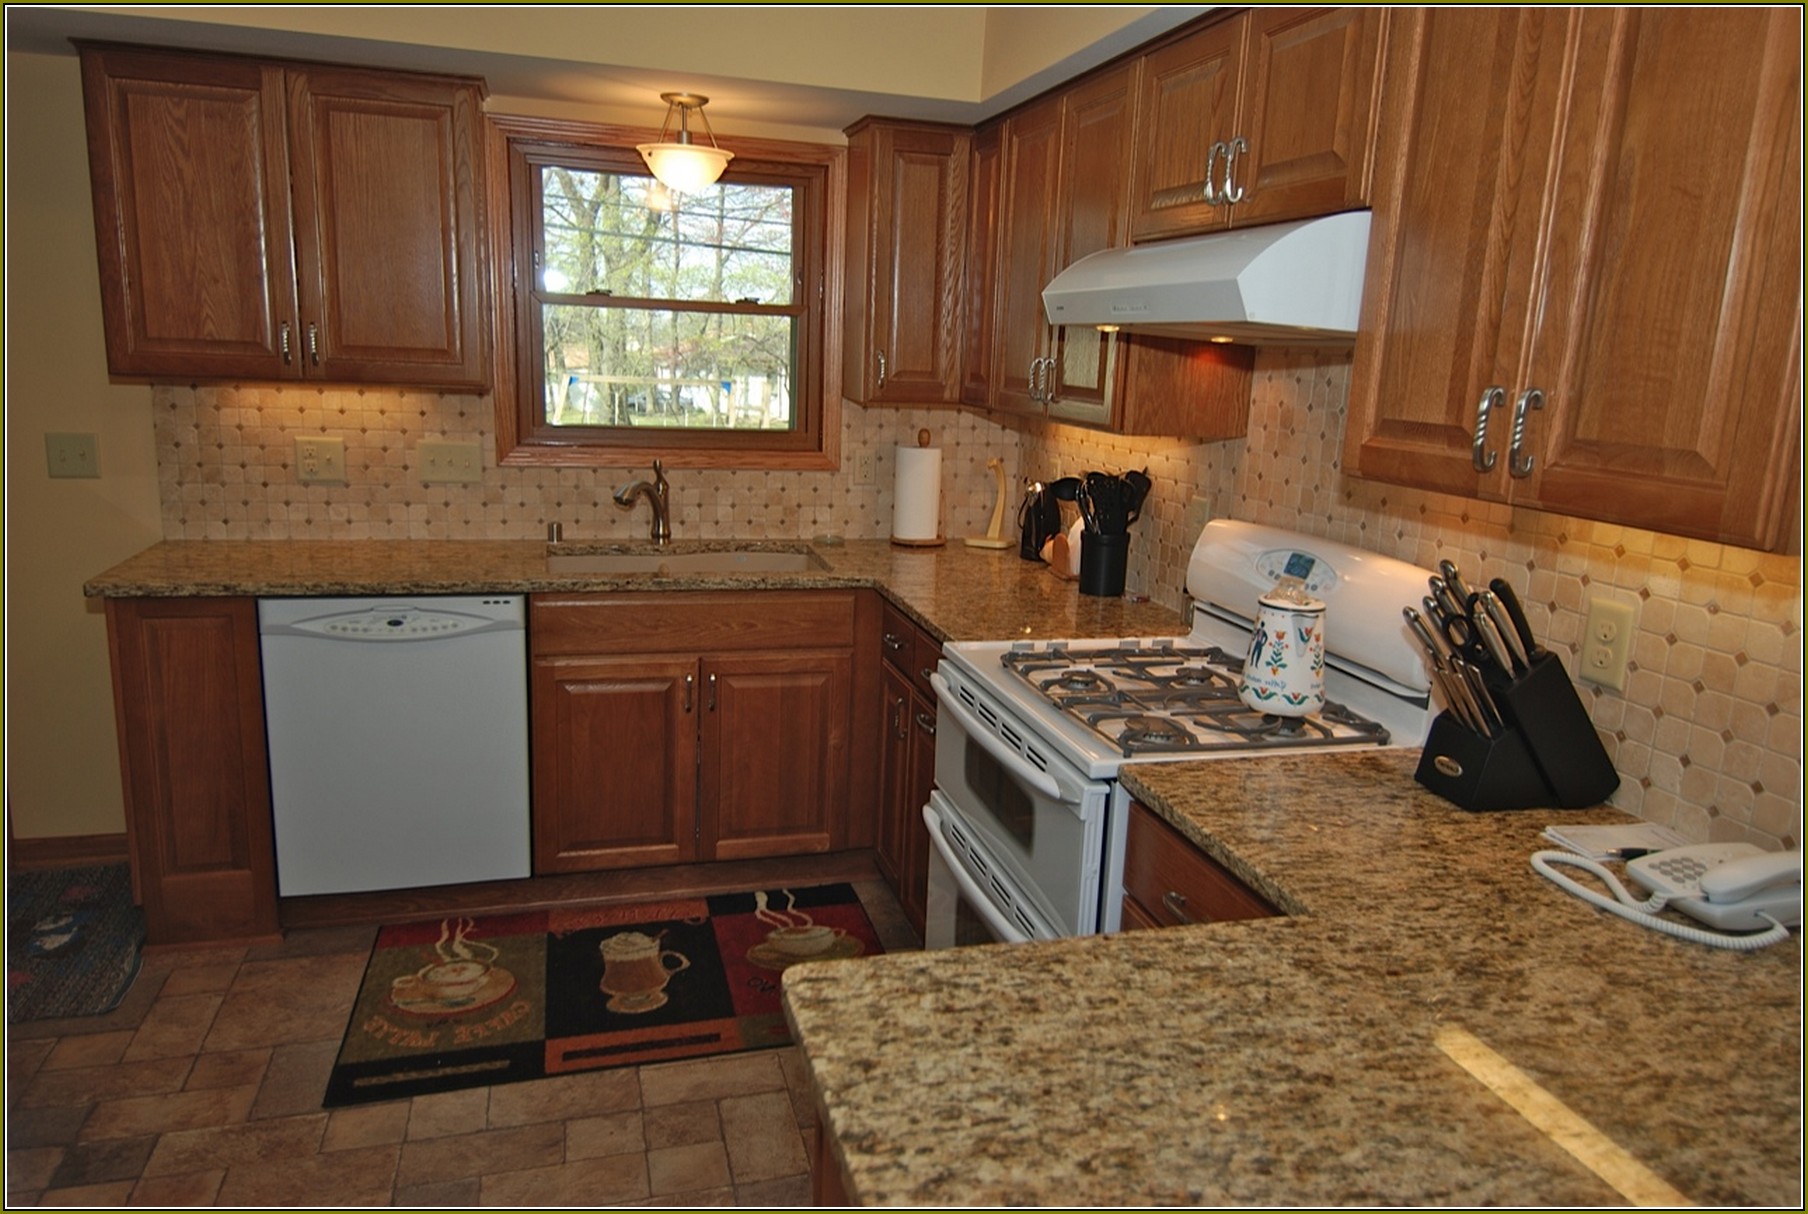 Hickory Kitchen Cabinets With Granite Countertops